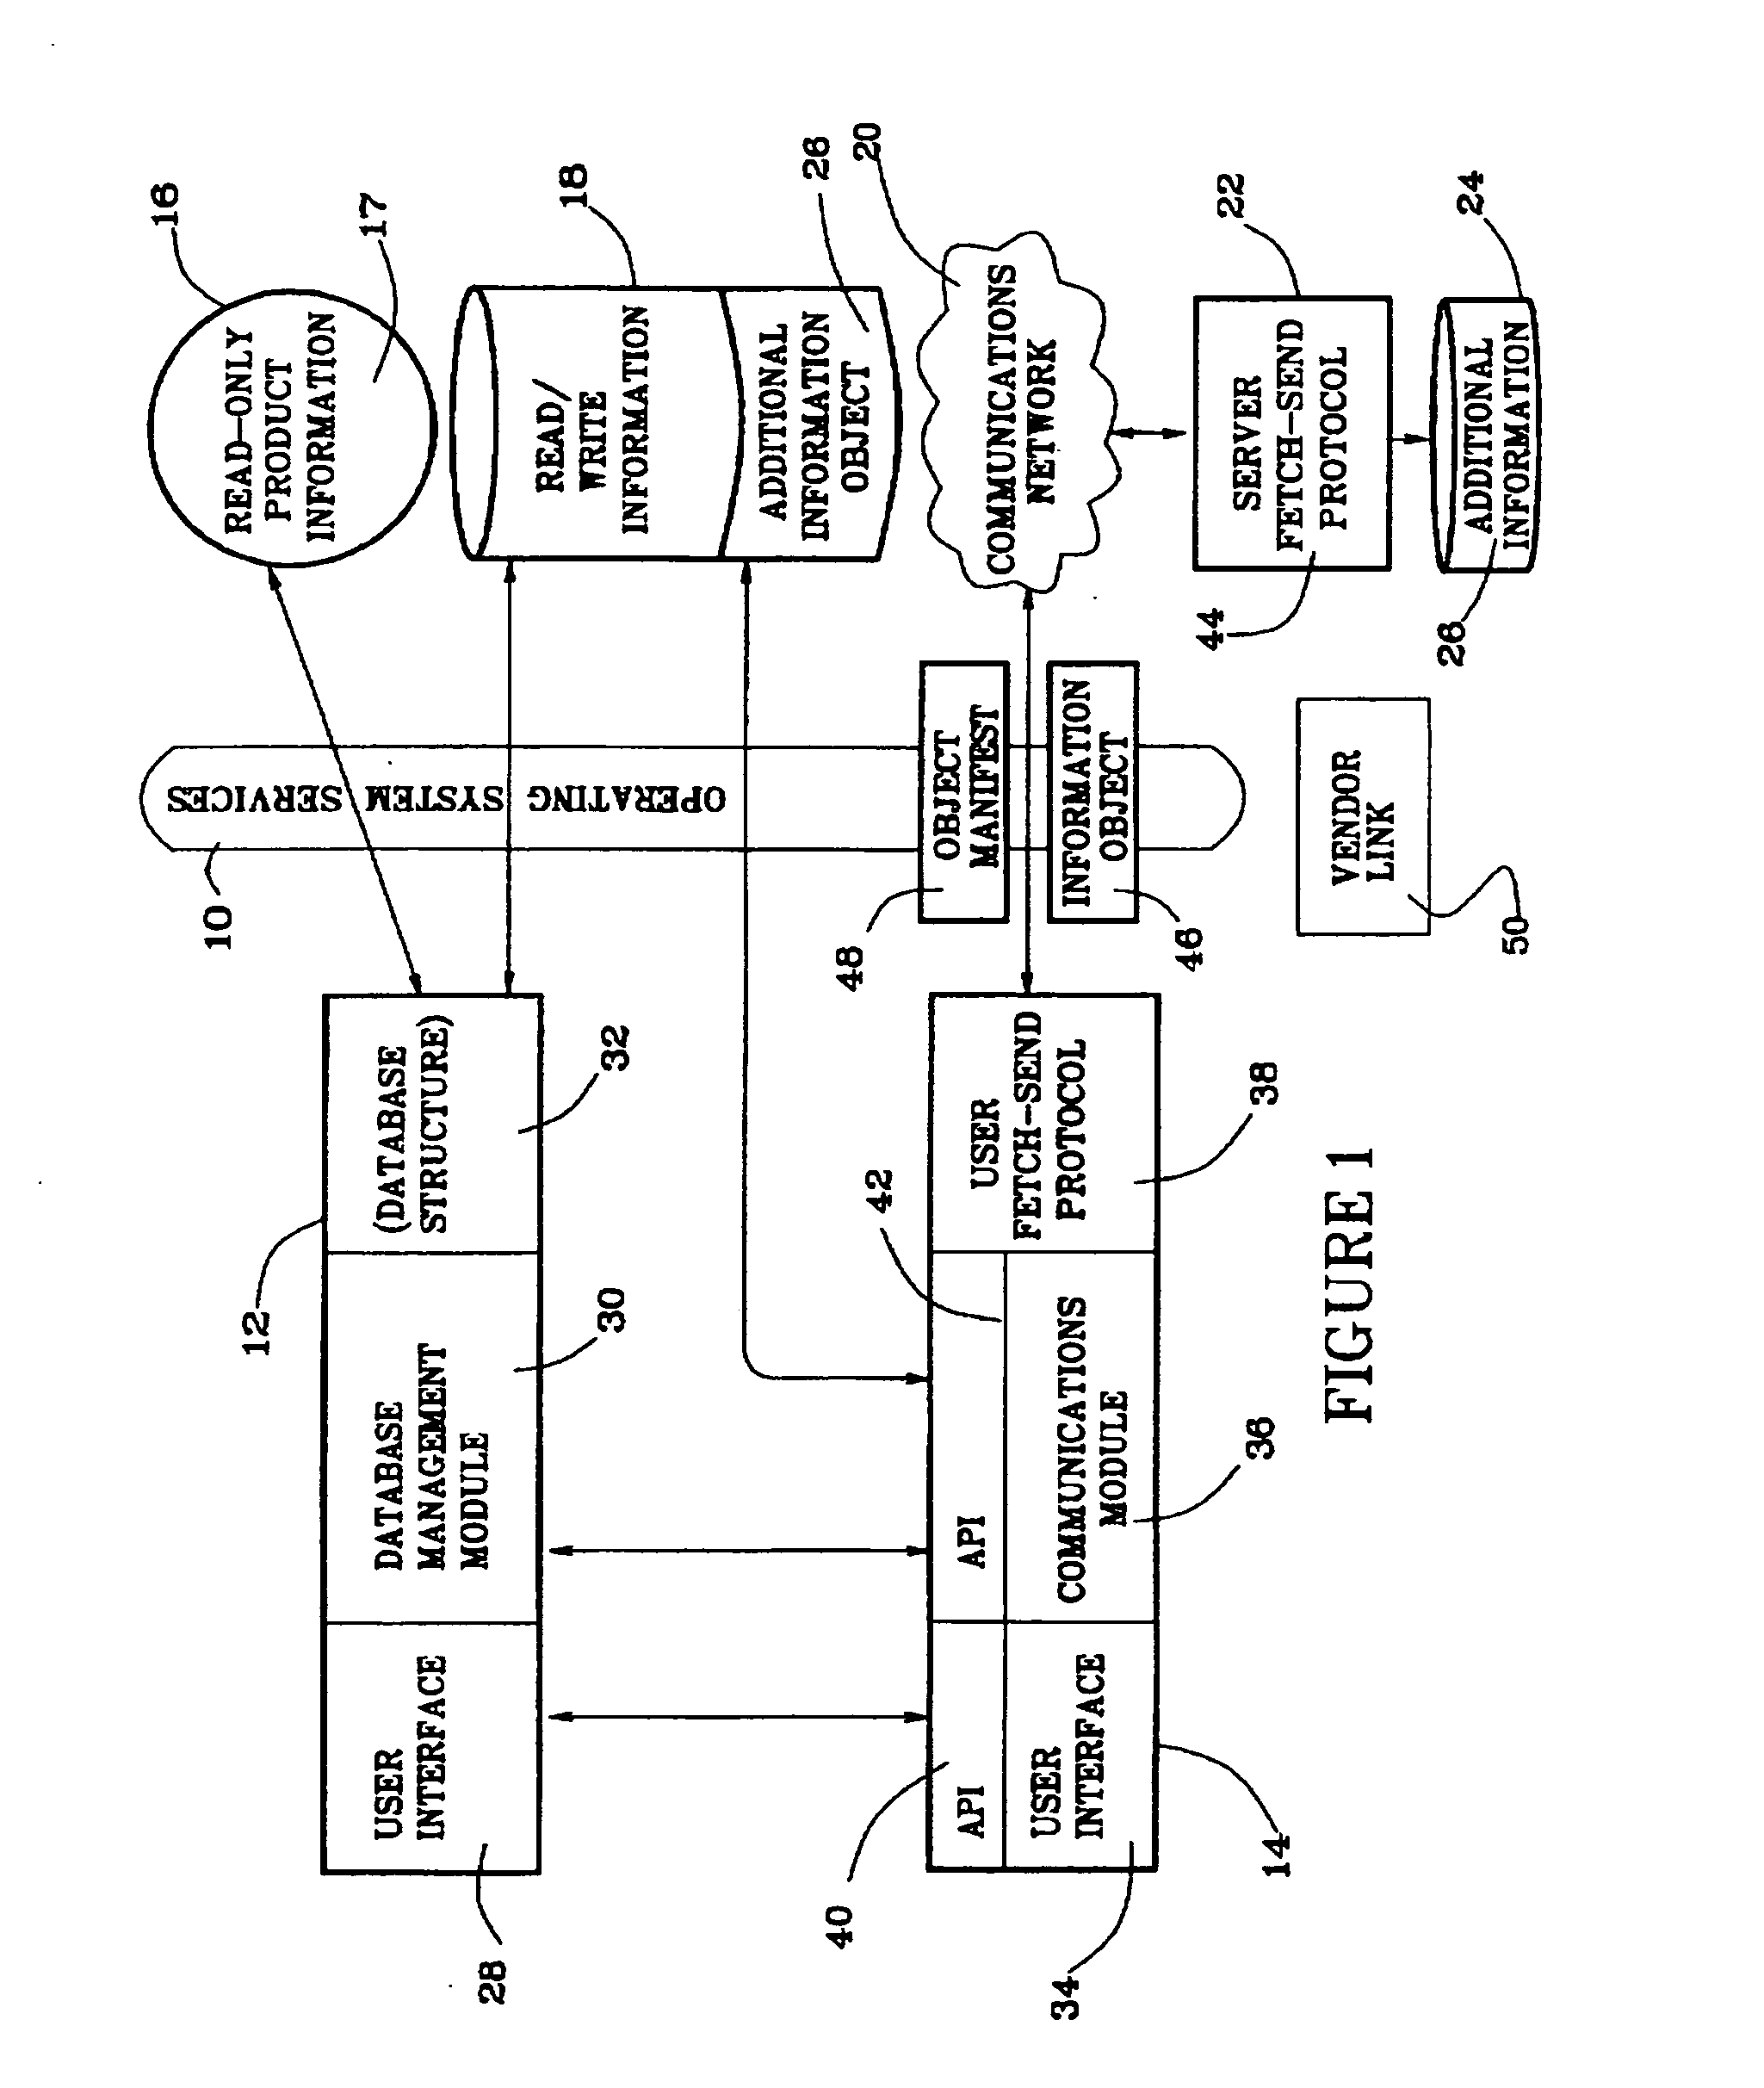 Software and method that enables selection of one of a plurality of online service providers